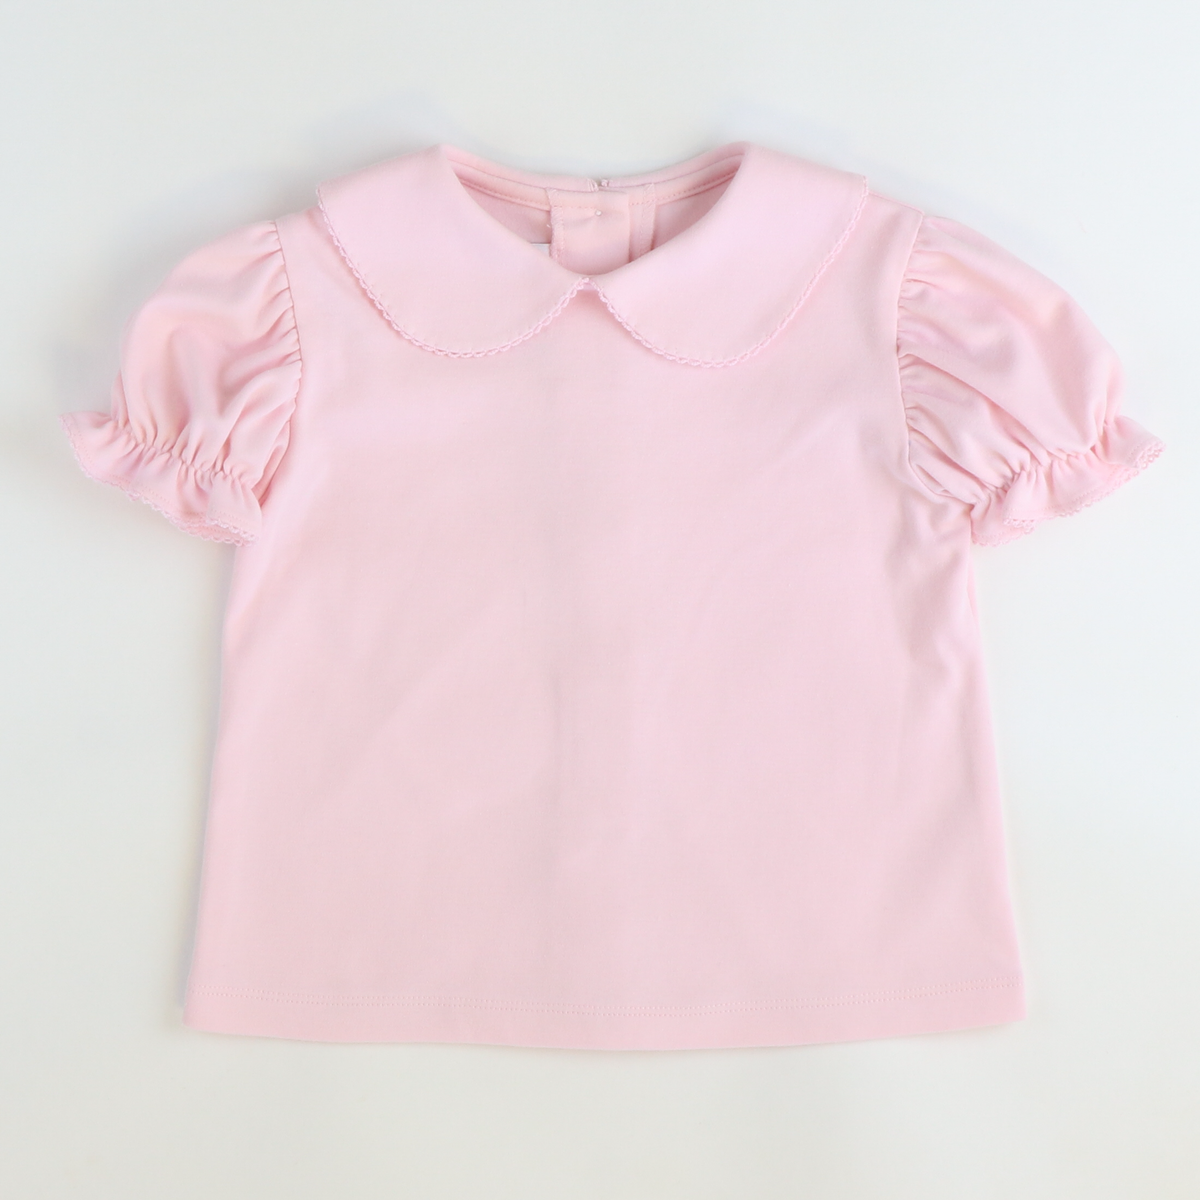 Girls Classic Short Sleeve Blouse - Light Pink Knit - Stellybelly